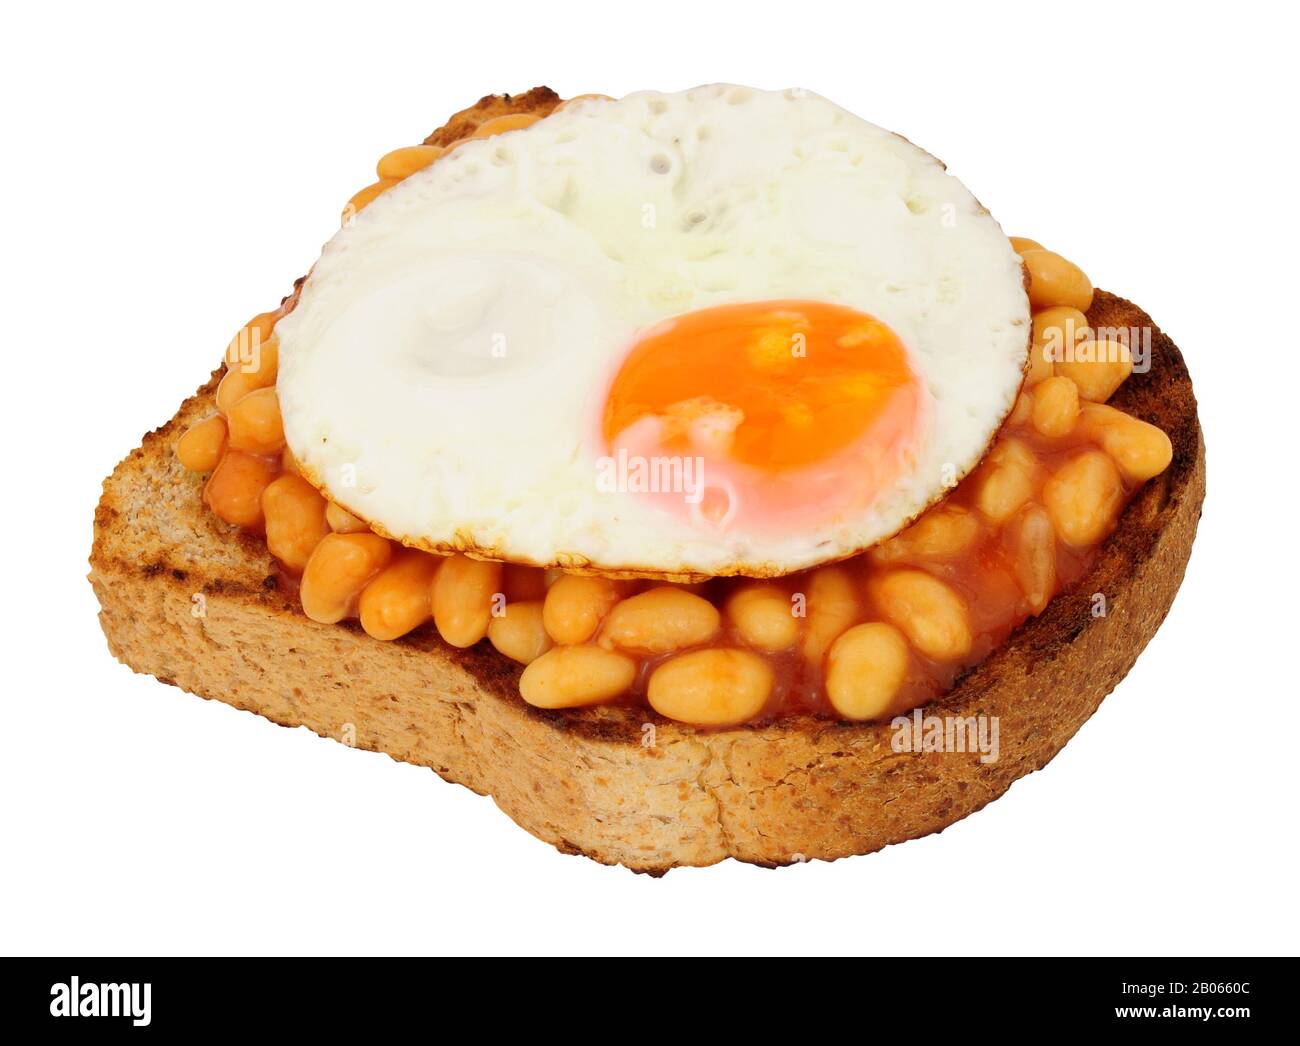 Fried egg and baked beans with tomato sauce on toast isolated on a white background Stock Photo